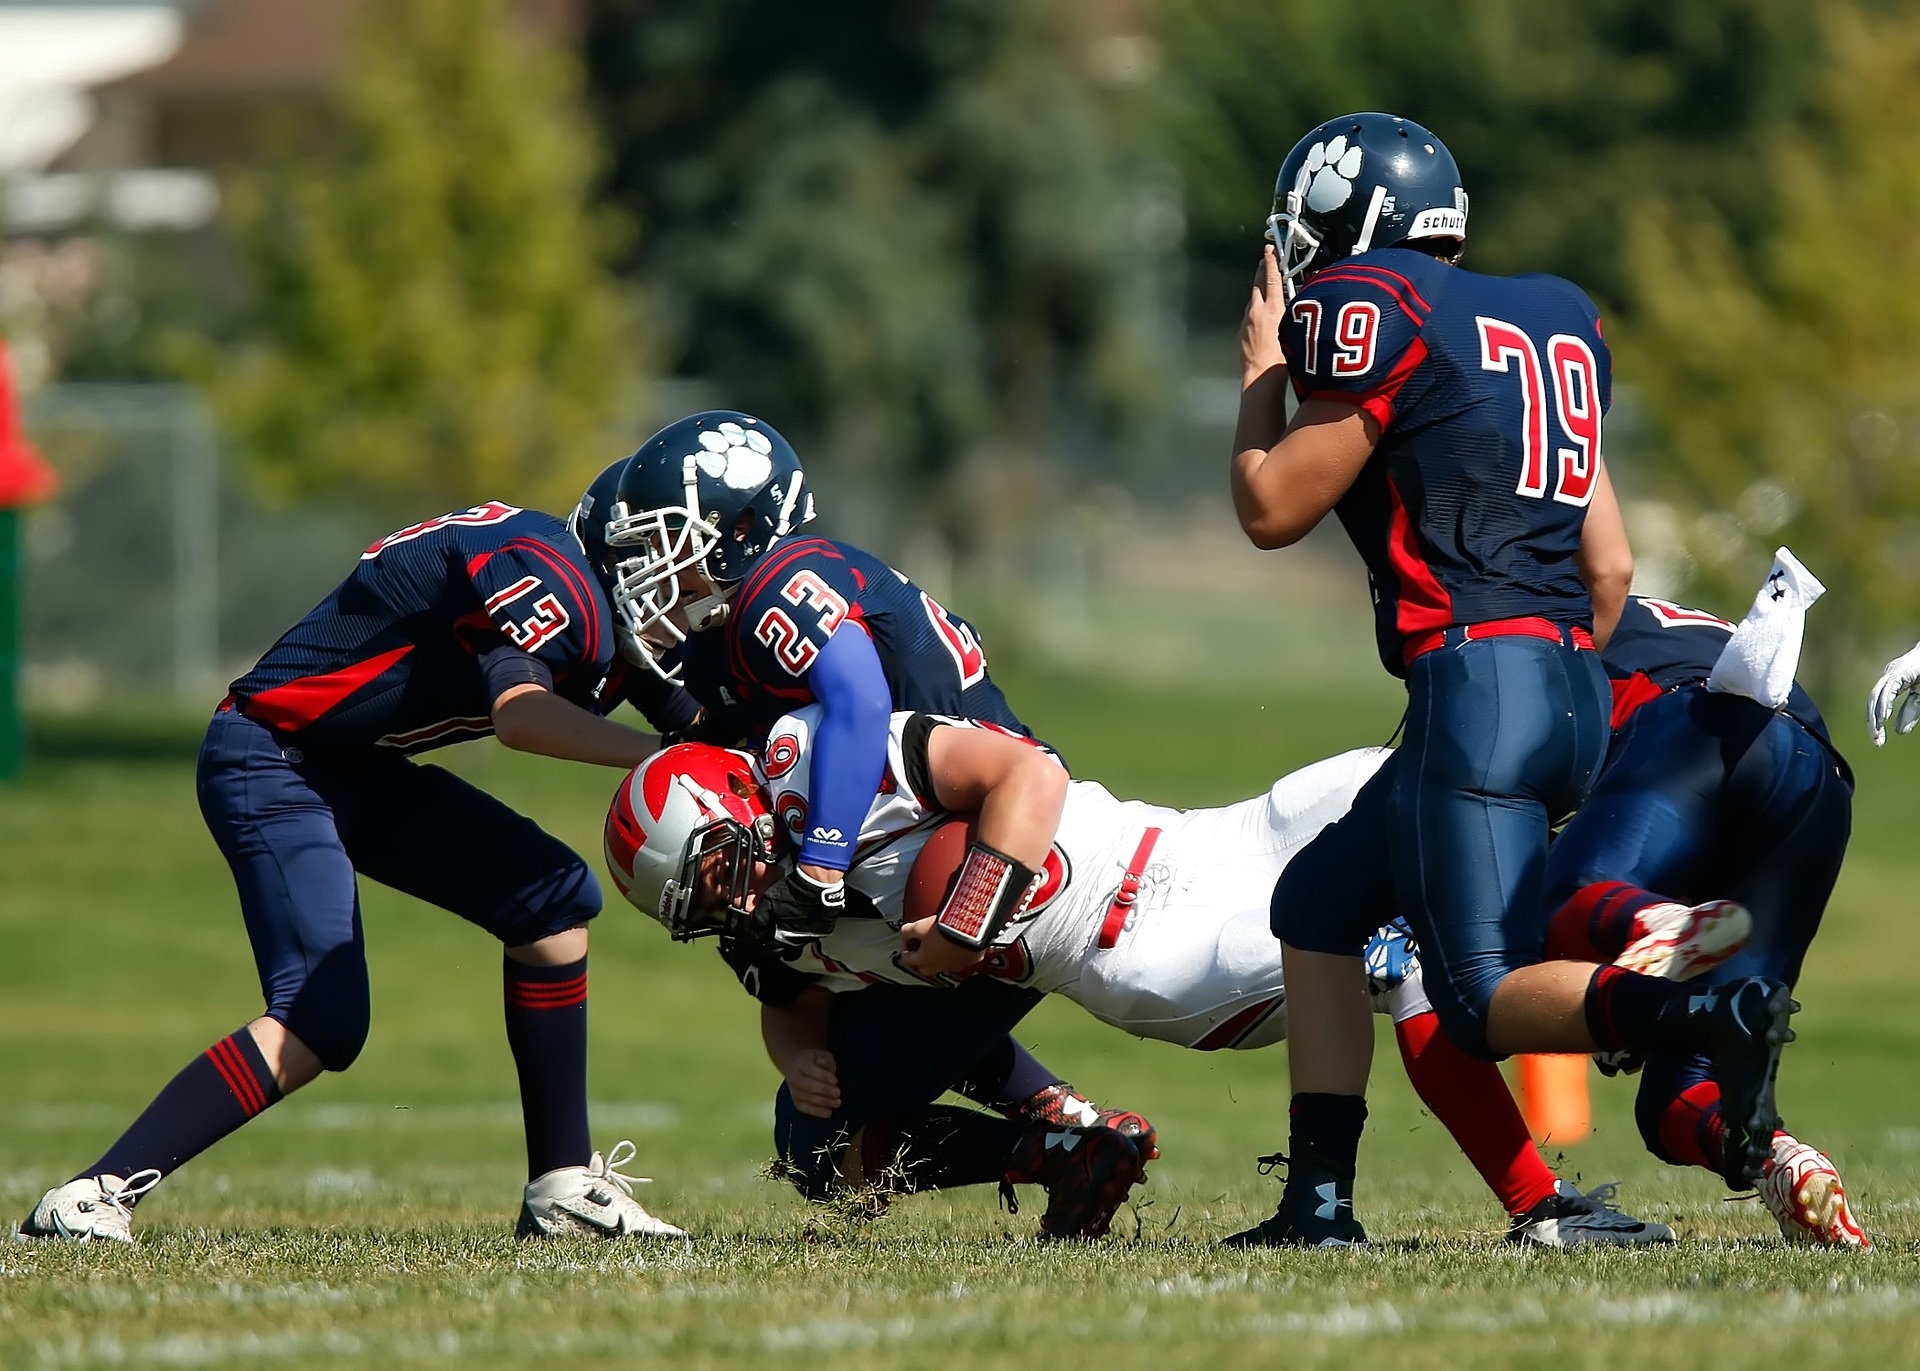 Football, cheerleading, volleyball and soccer ramp up during the fall season and so do the chance for sports-related injuries.